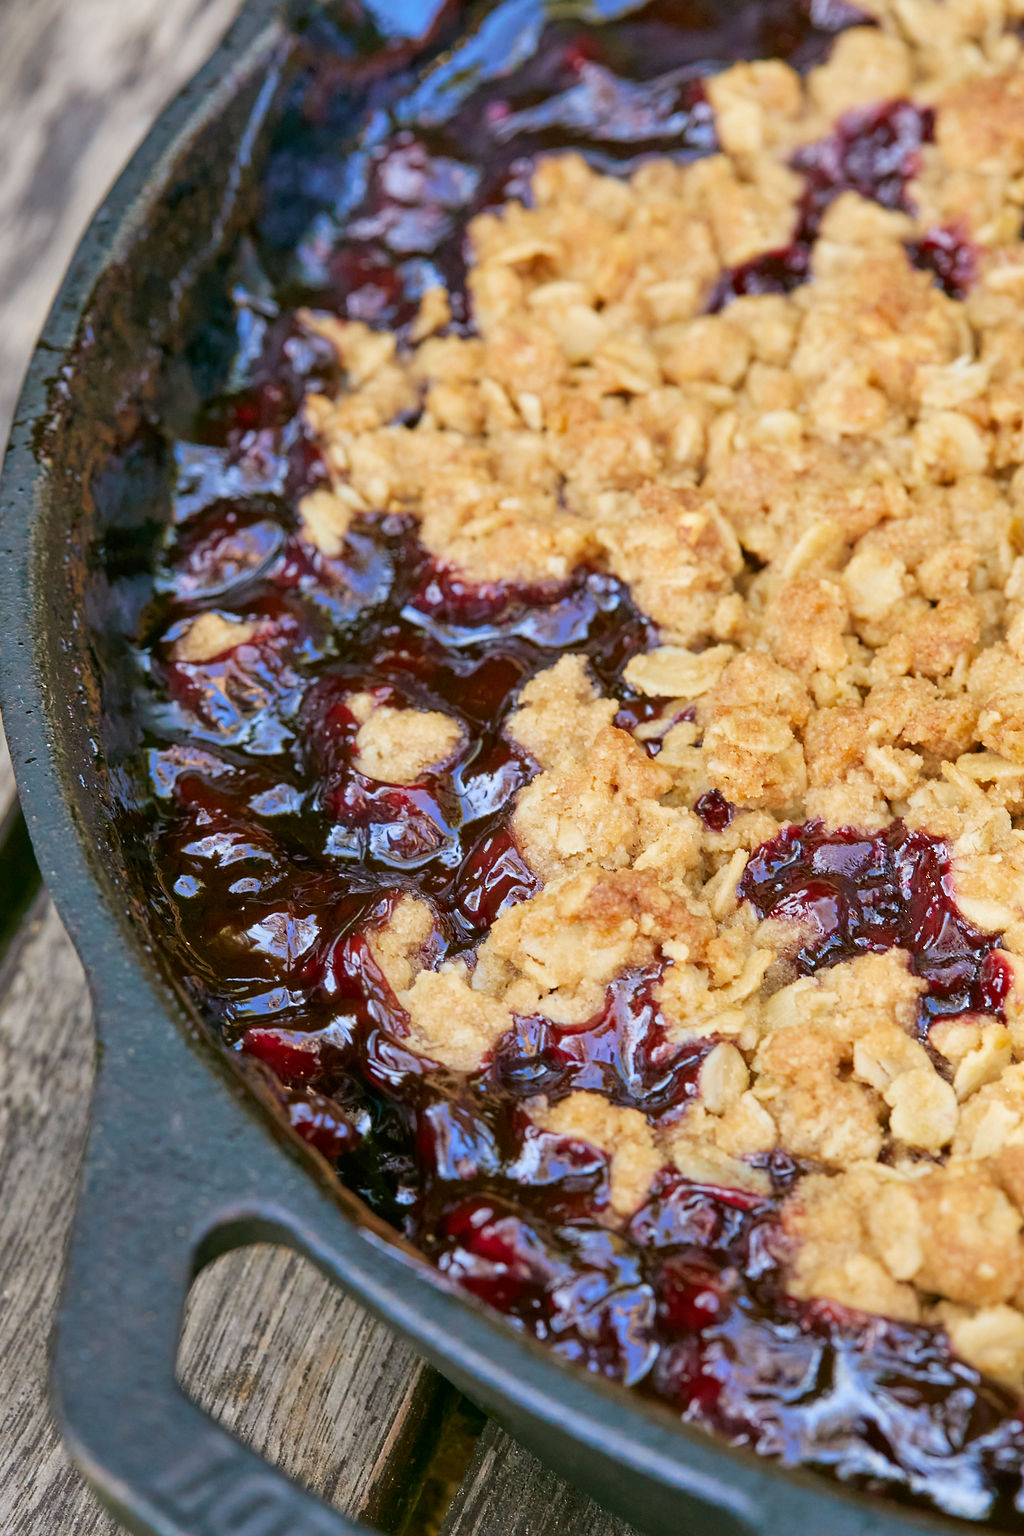 A close up of my Homemade Skillet Cherry Crisp after baking, to show texture, color, and consistency.